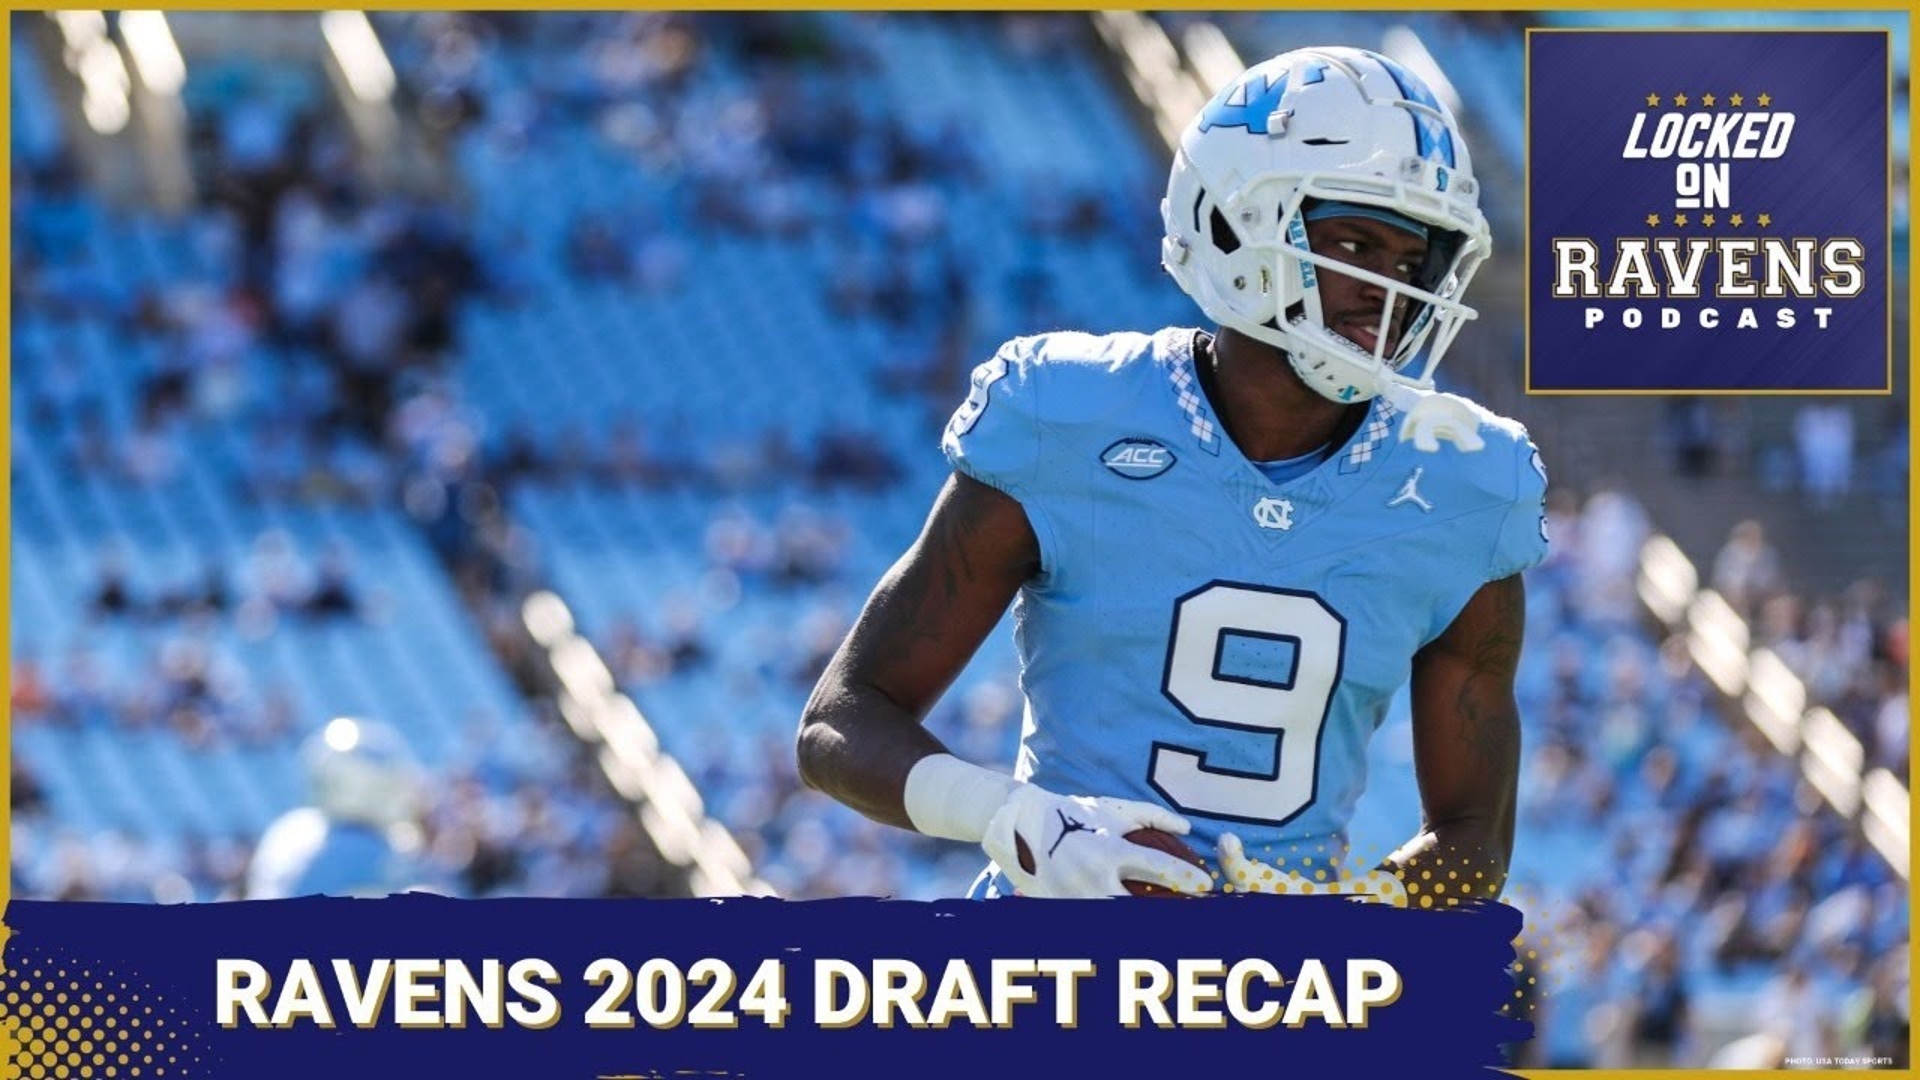 We look at the Baltimore Ravens' Day 3 of the 2024 NFL draft, looking at the players they selected and more.